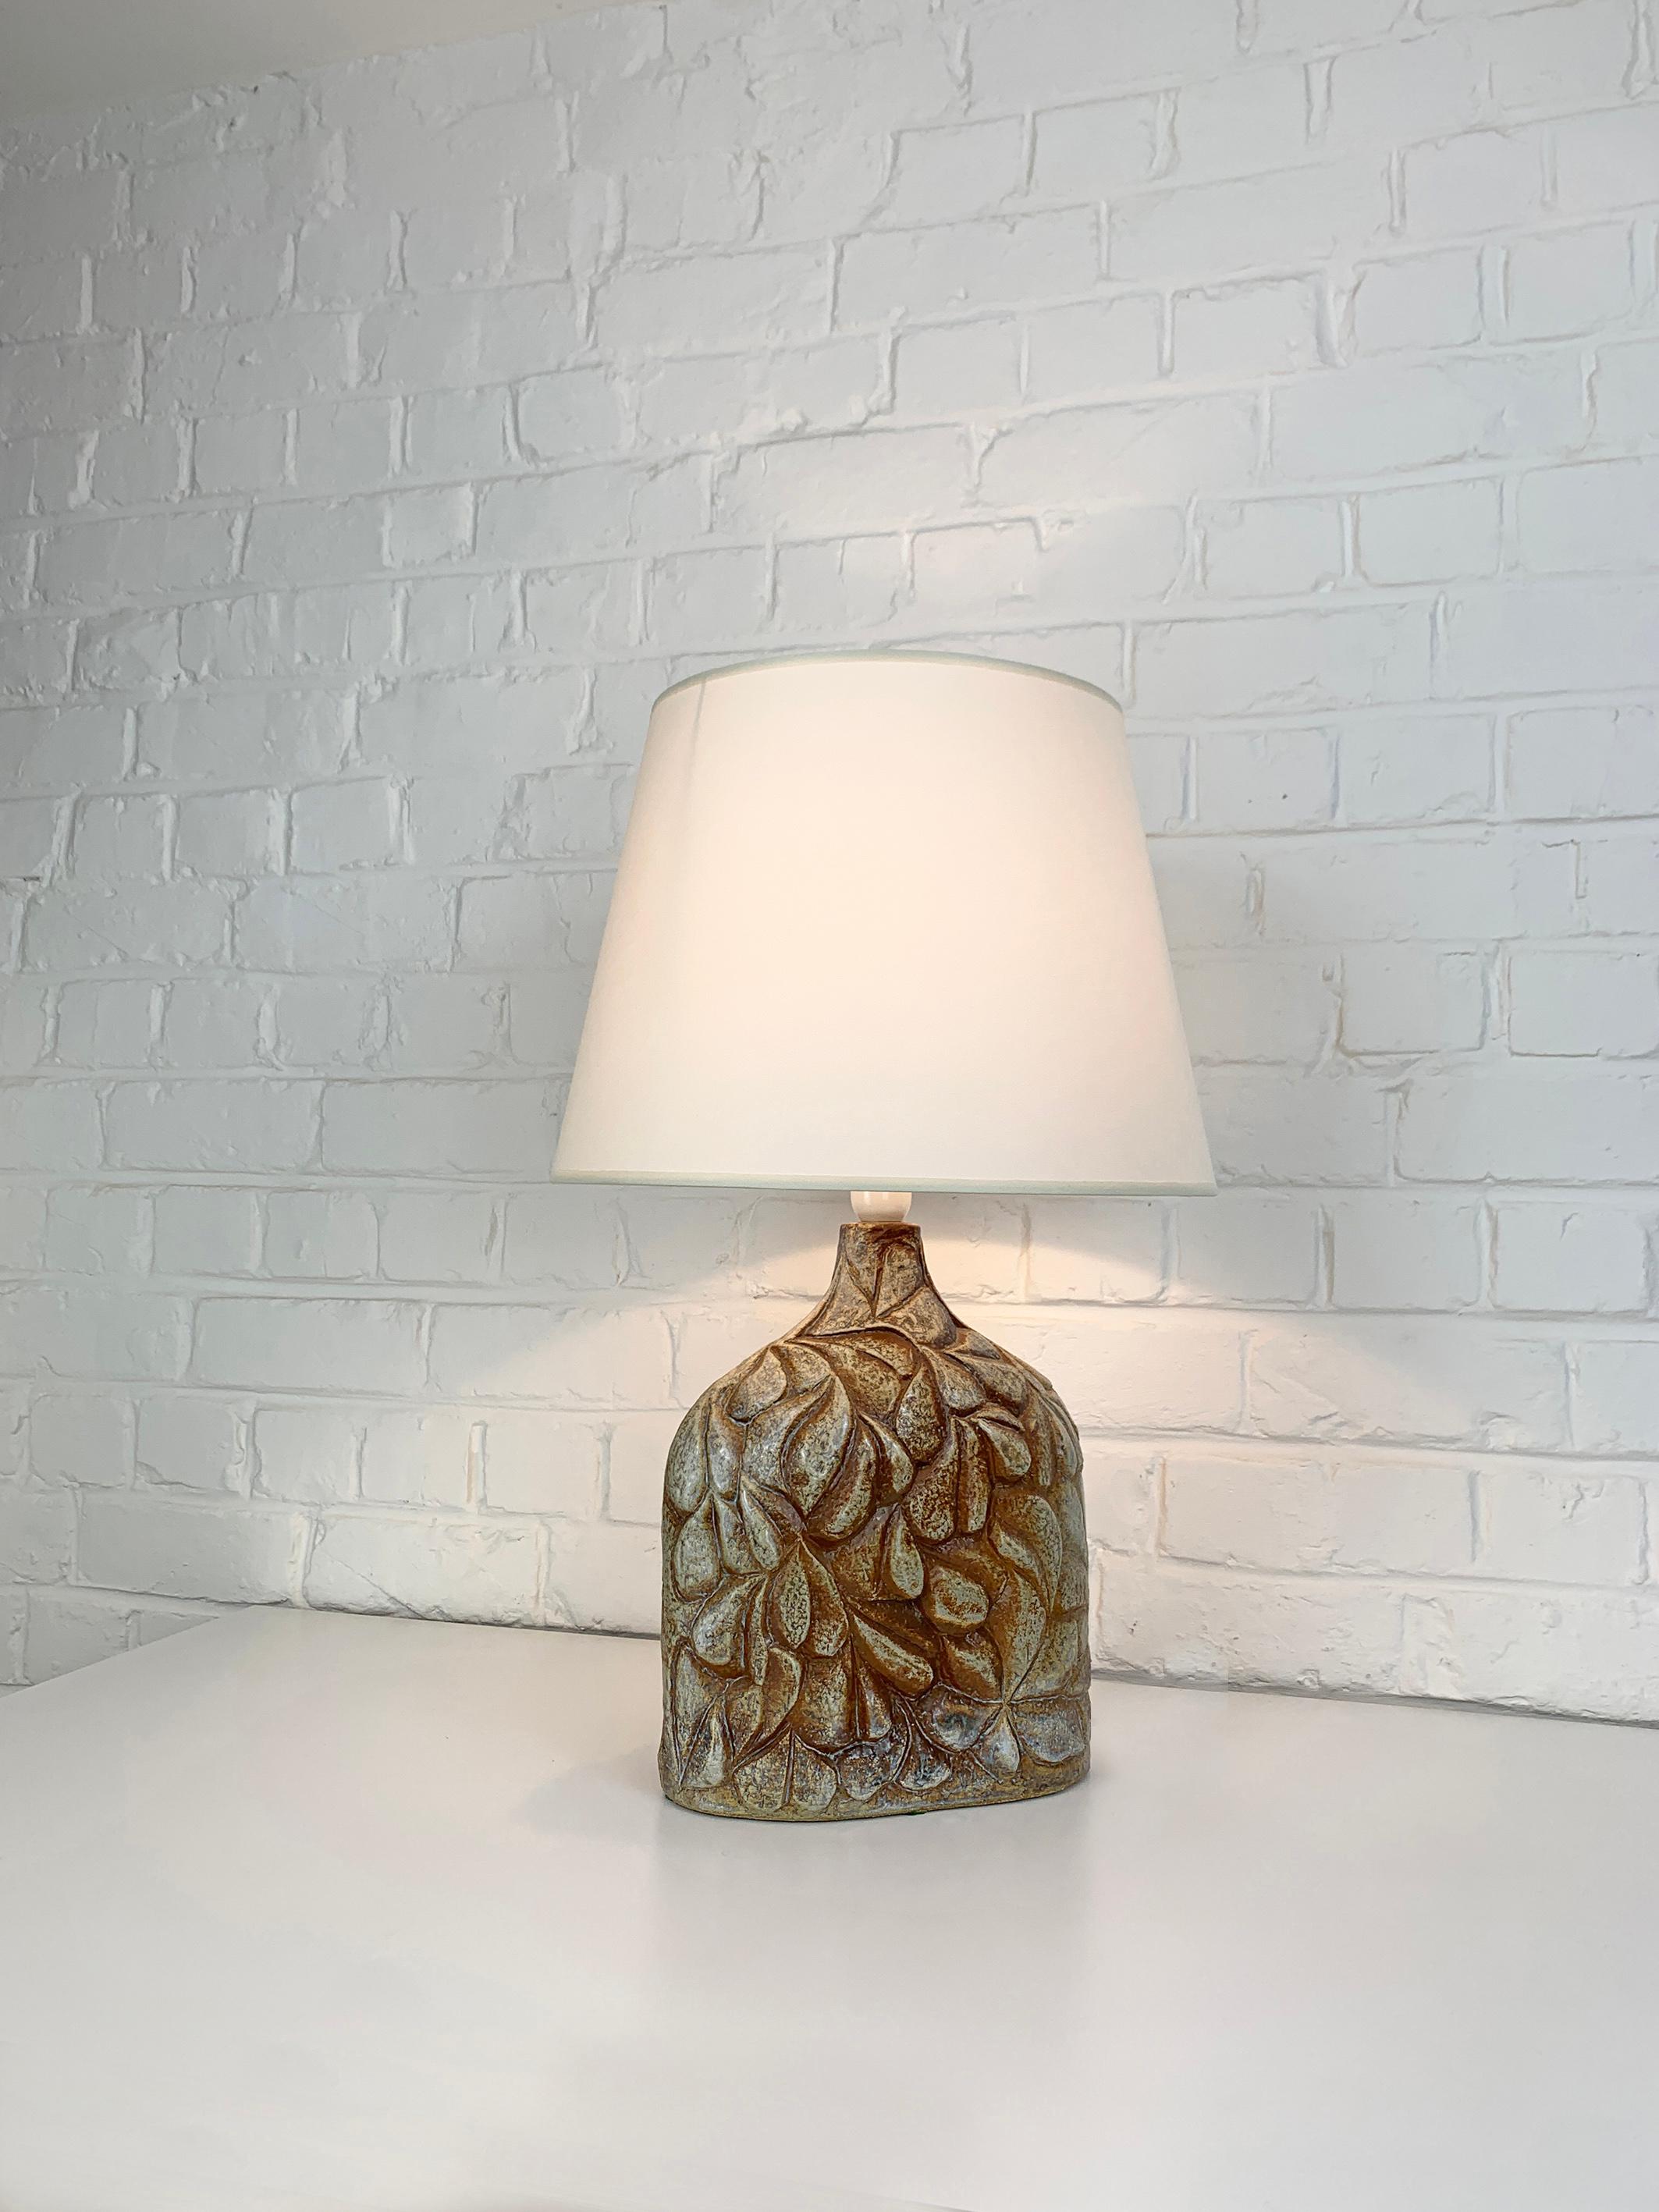 Danish Mid-Century stoneware table lamp of the 1970s, attributed to Haico Nitzsche. Sculptural lamp in earthy colored glazed stoneware. 

Haico Nitzsche trained in ceramics in Germany before teaching at the National Institute of Design in Ahmedabad,